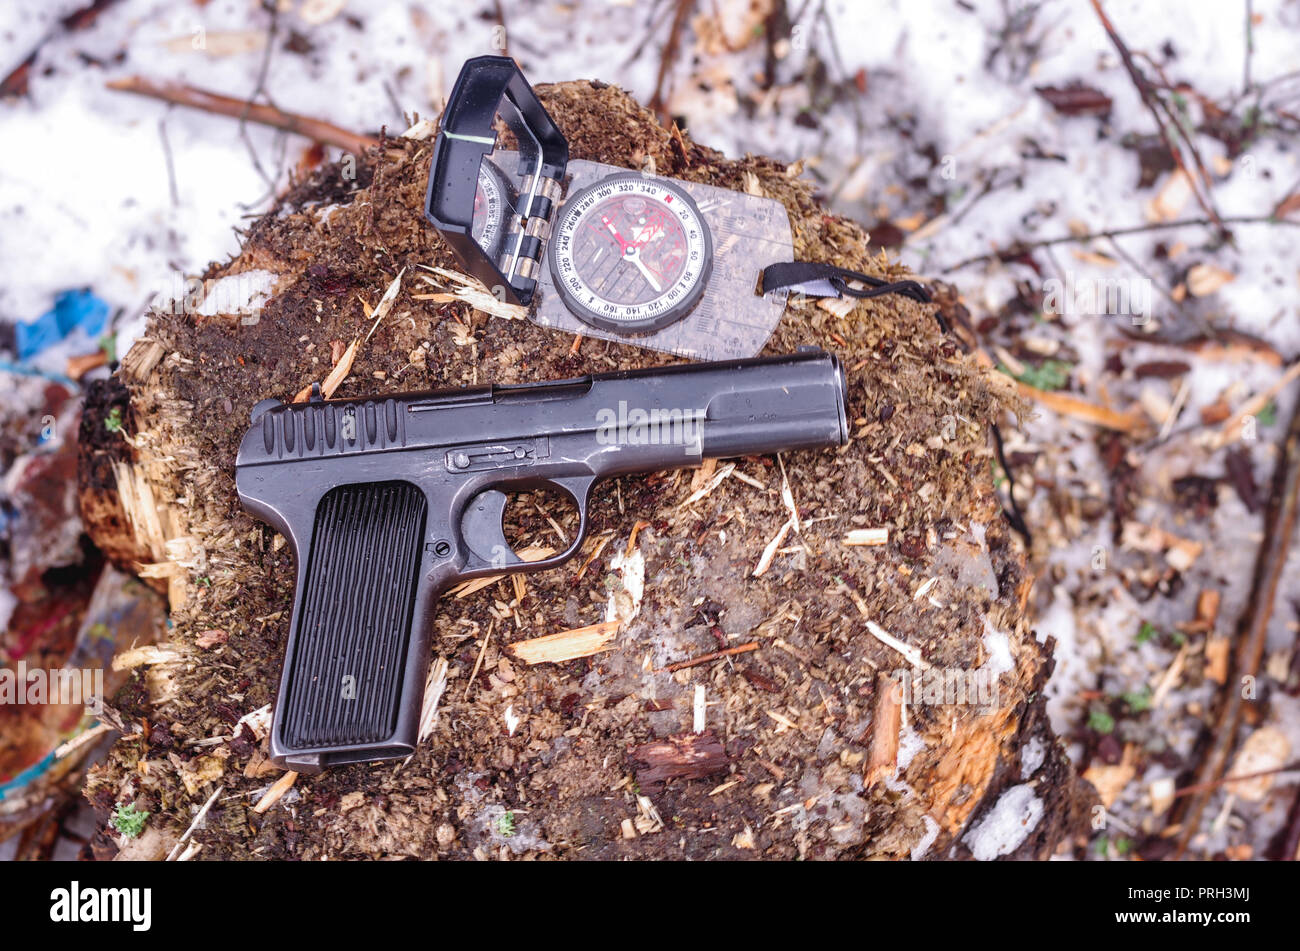 Black pistol and compass. The Makarov pistol. The gun is made in the USSR. Top. Stock Photo